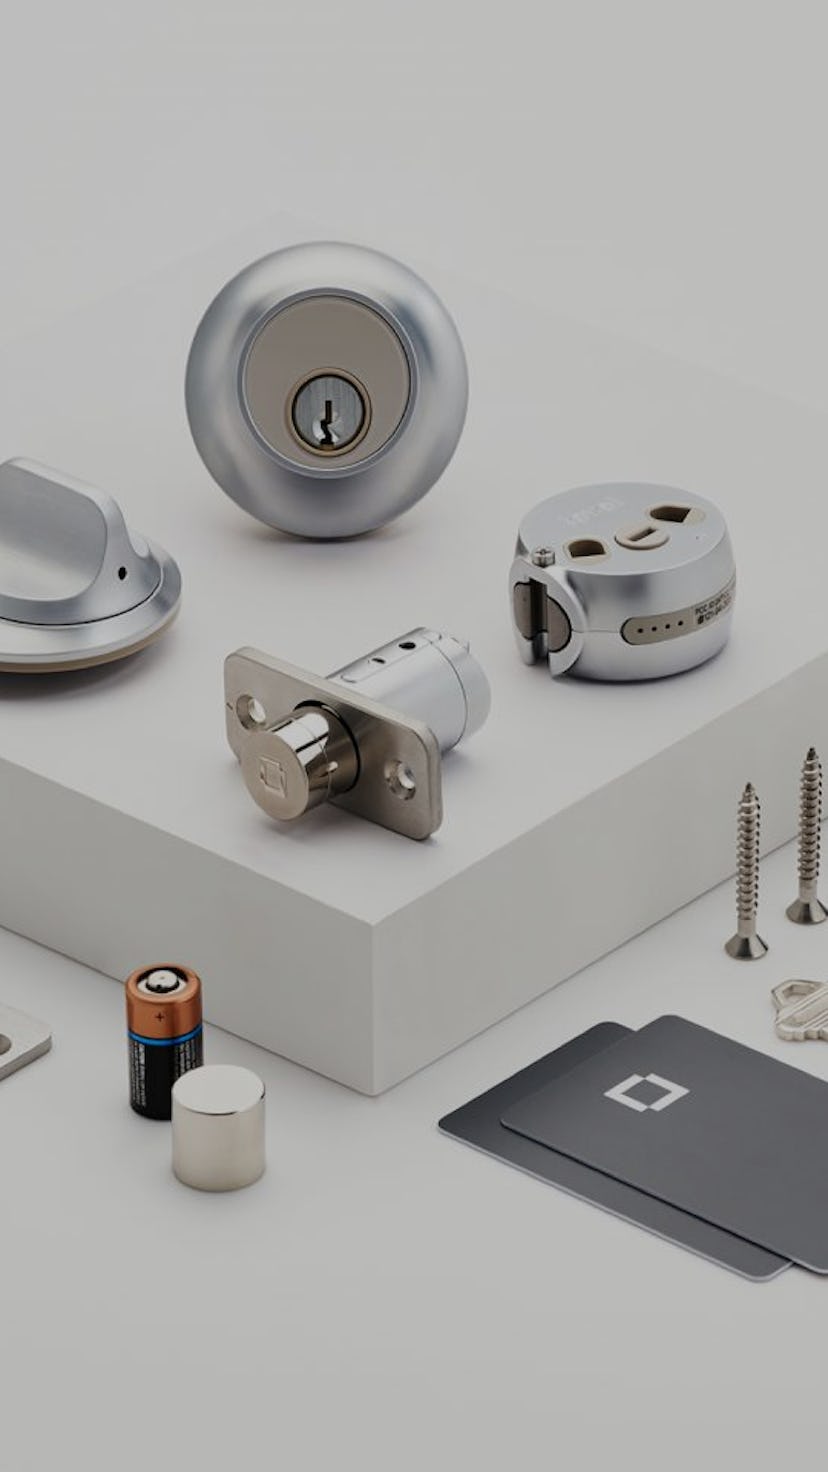 Level Touch smart lock components